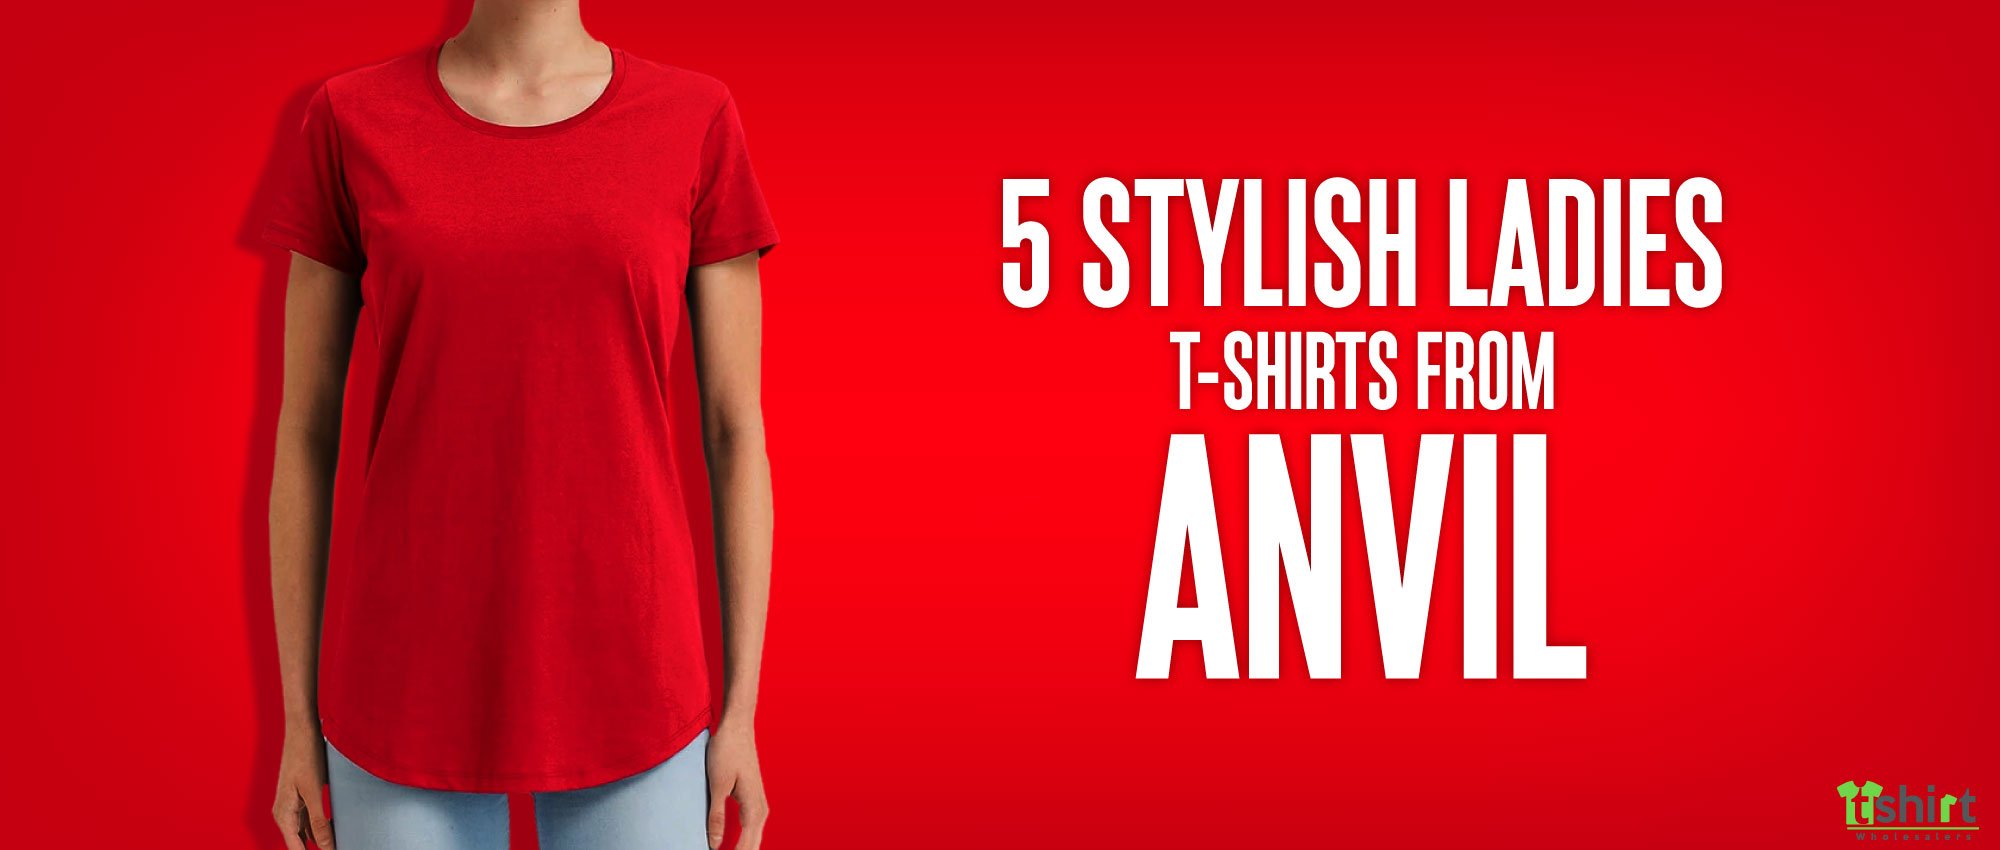 5 Stylish ladies T-shirts from Anvil